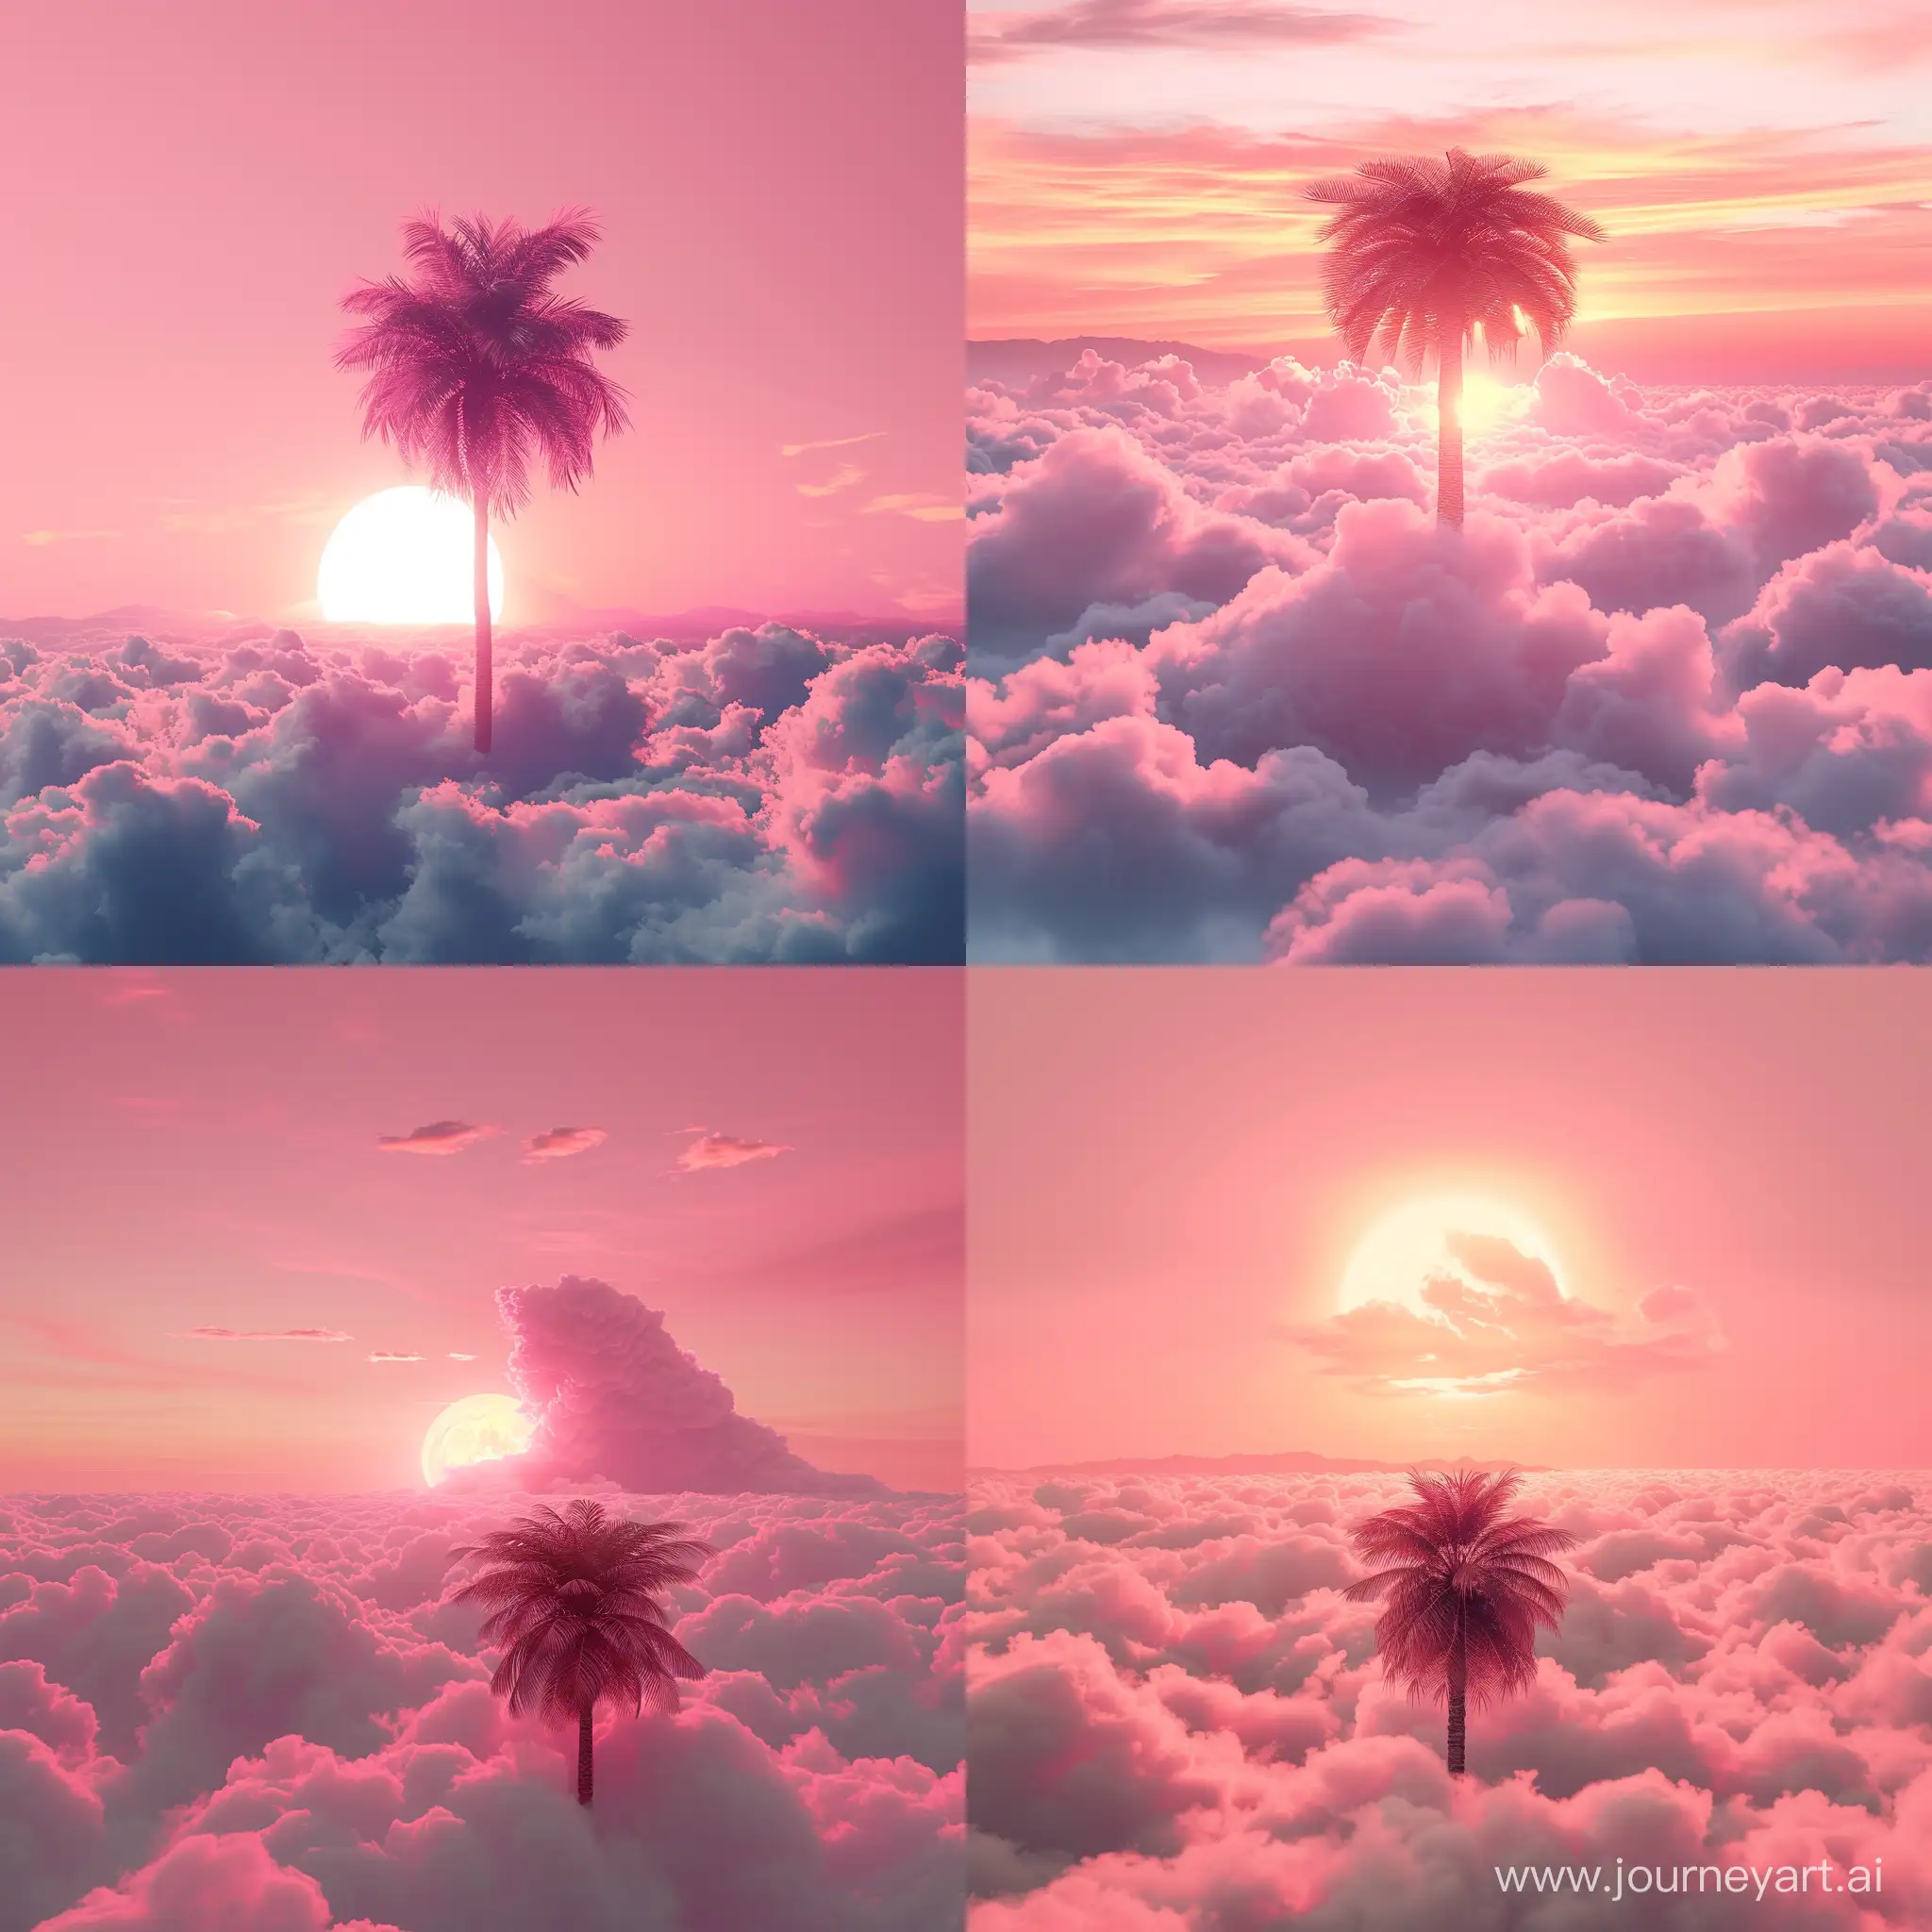 Serene-Pink-Sunset-with-CloudEnveloped-Palms